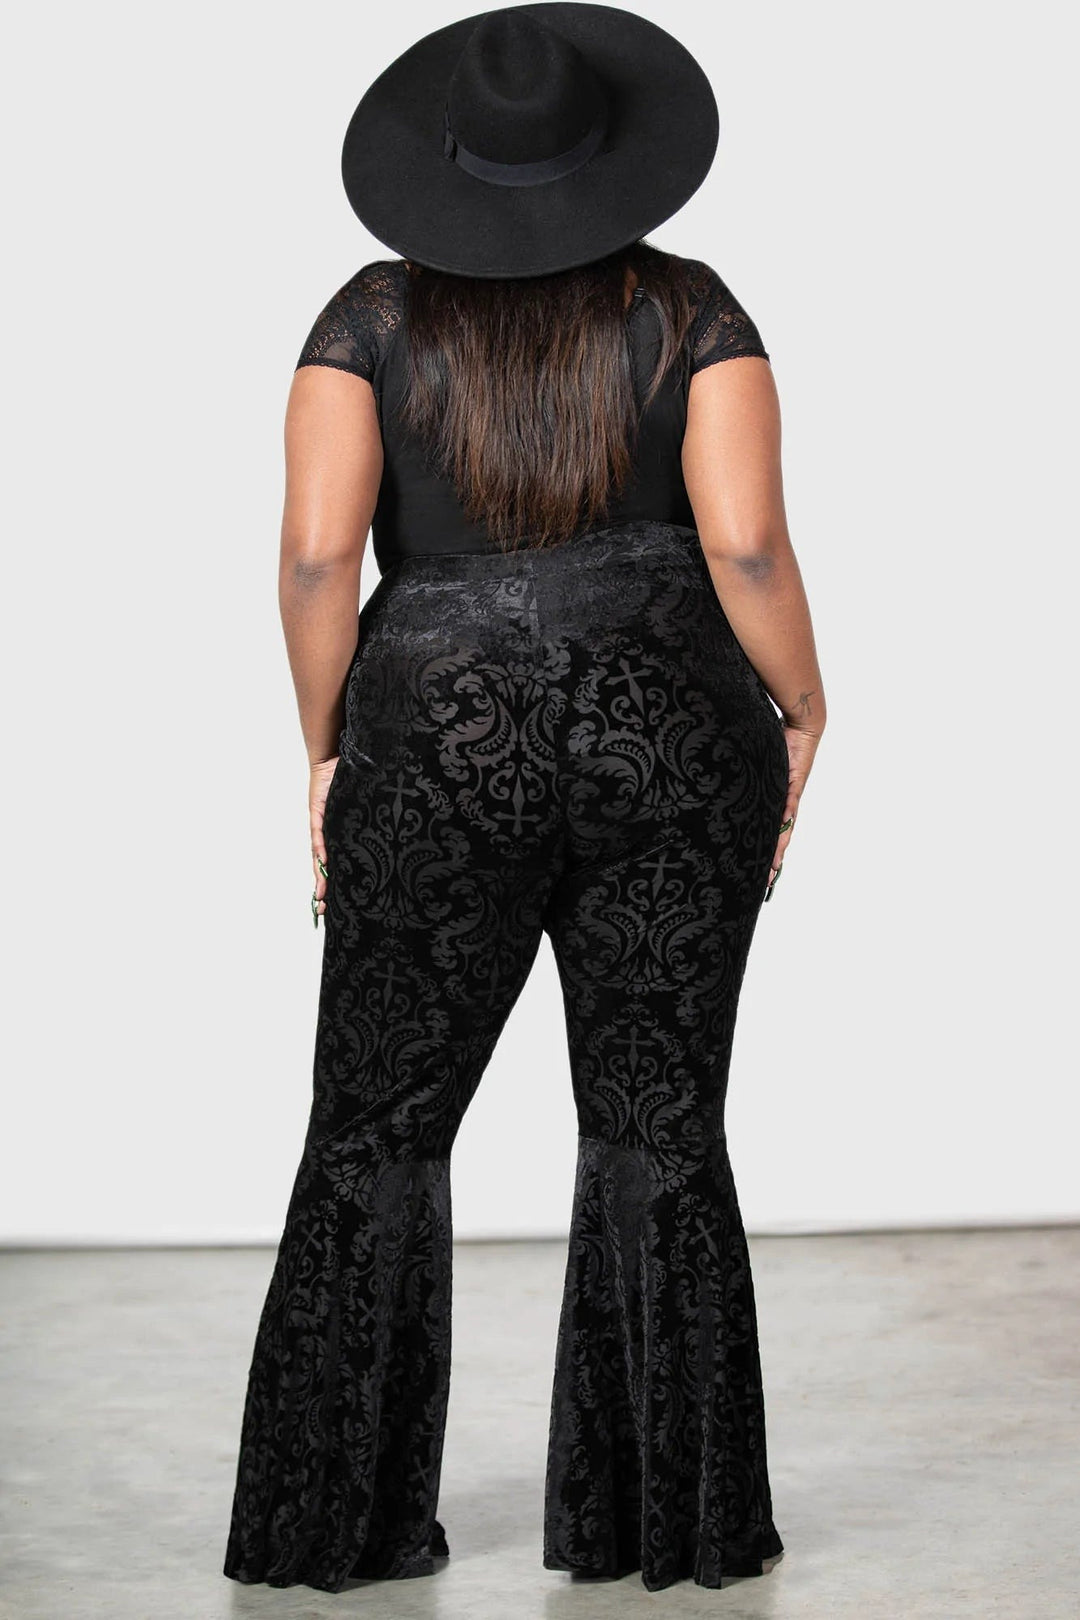 womens plus sized bell bottoms